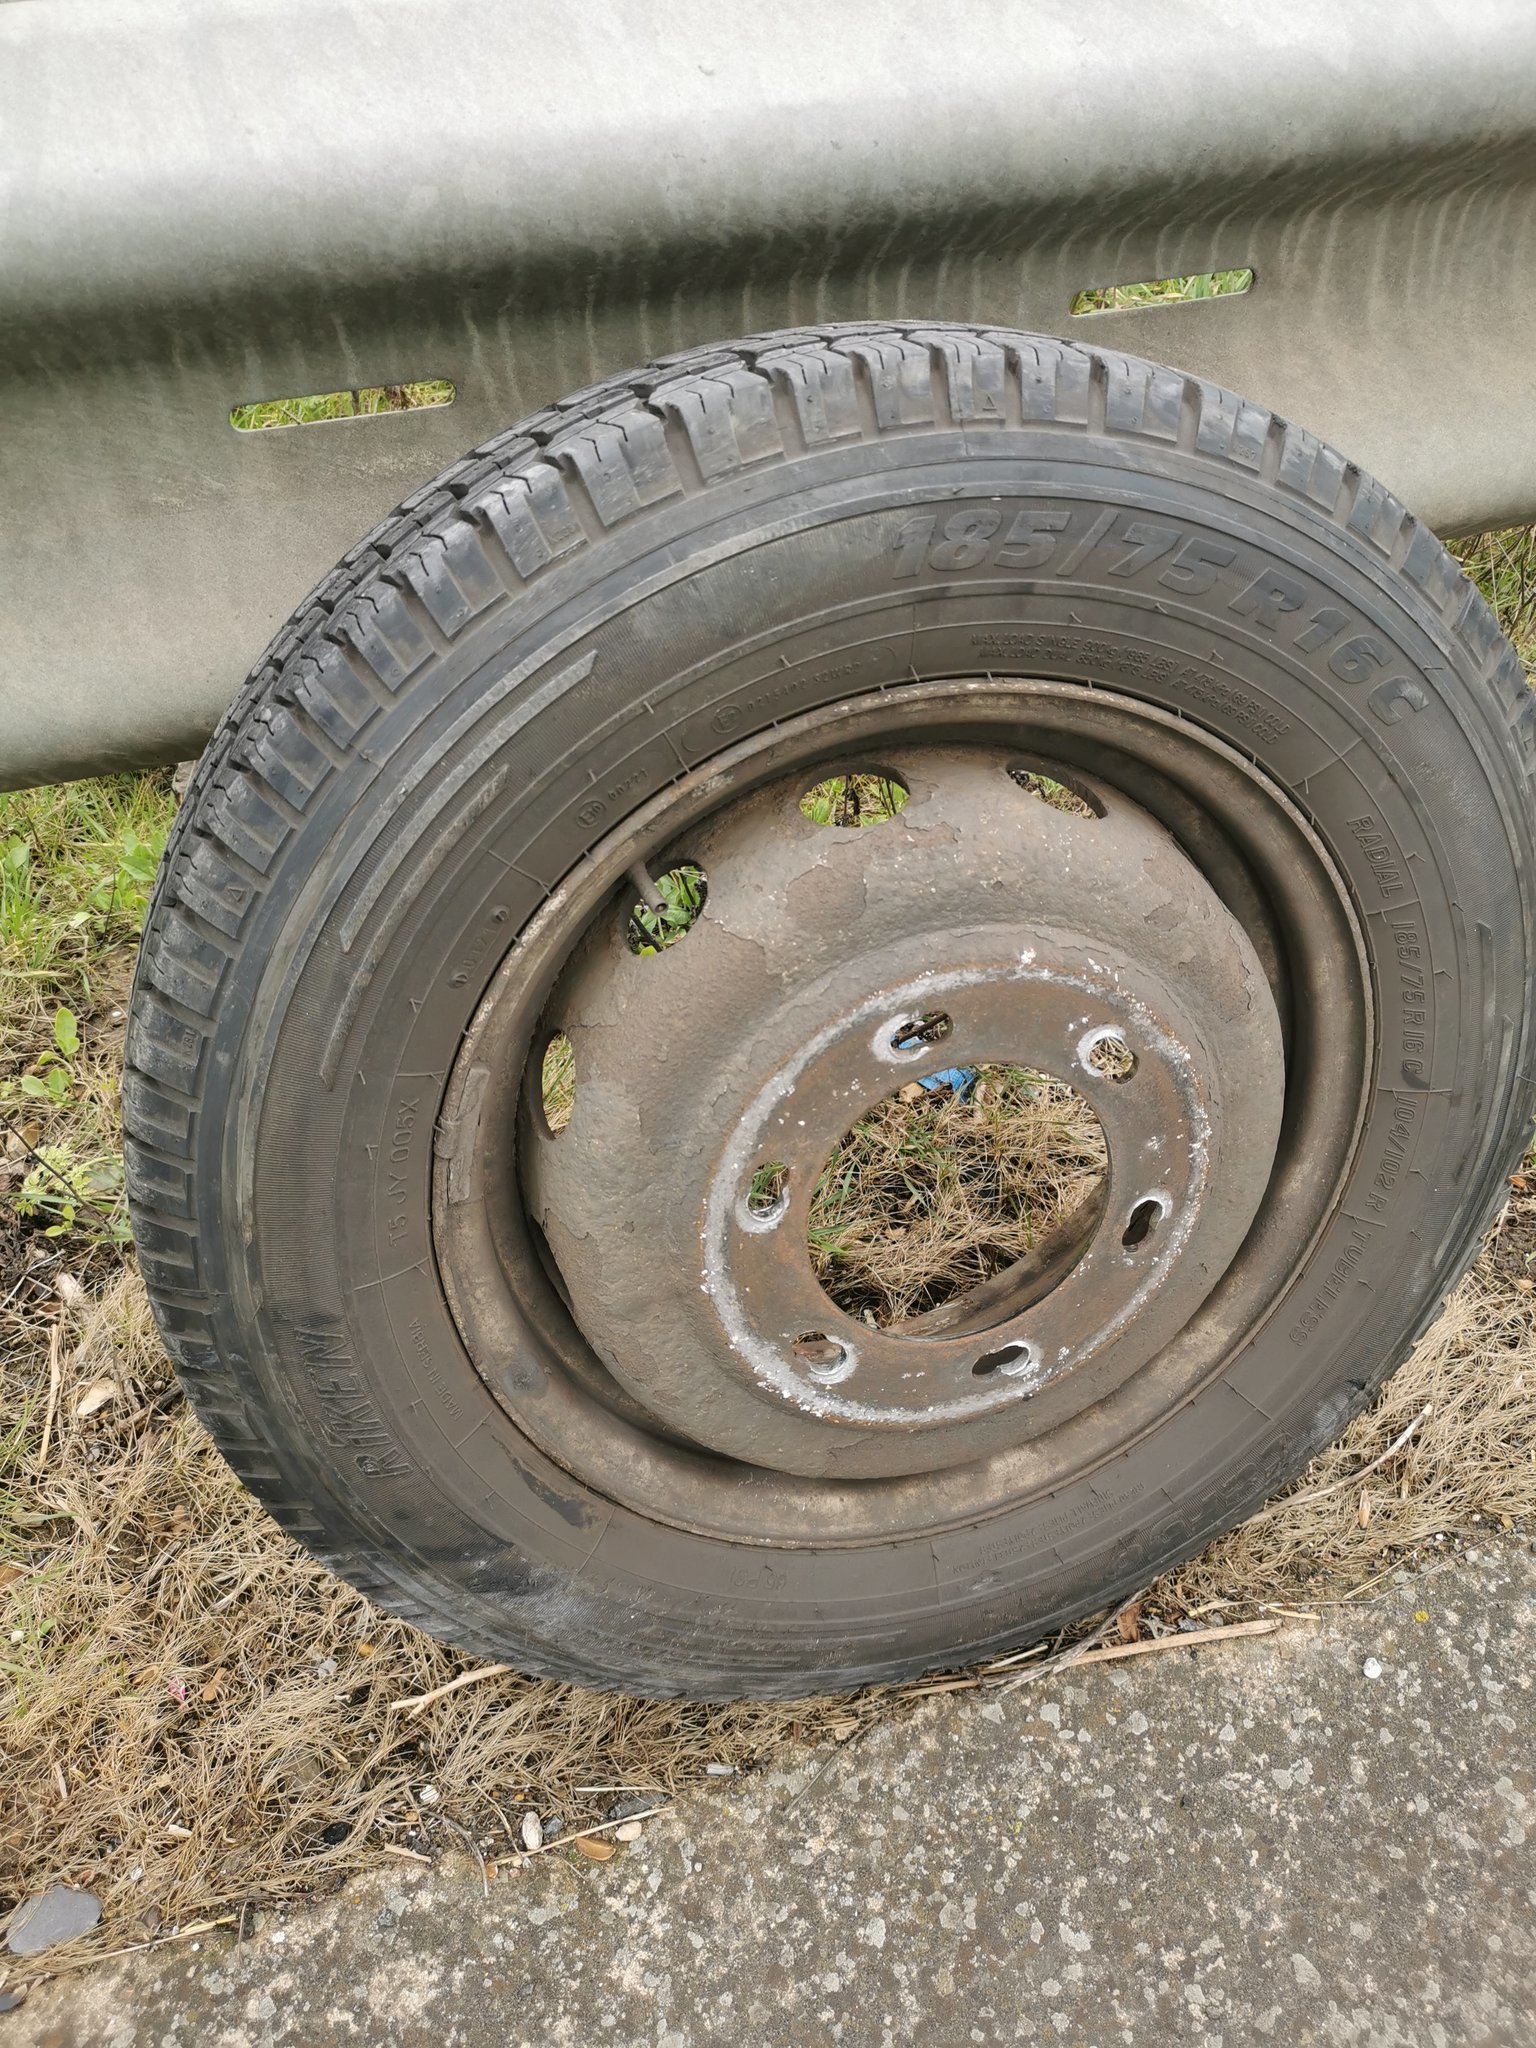 The tyre that struck the Vauxhall. Credit: BCH Road Policing Unit